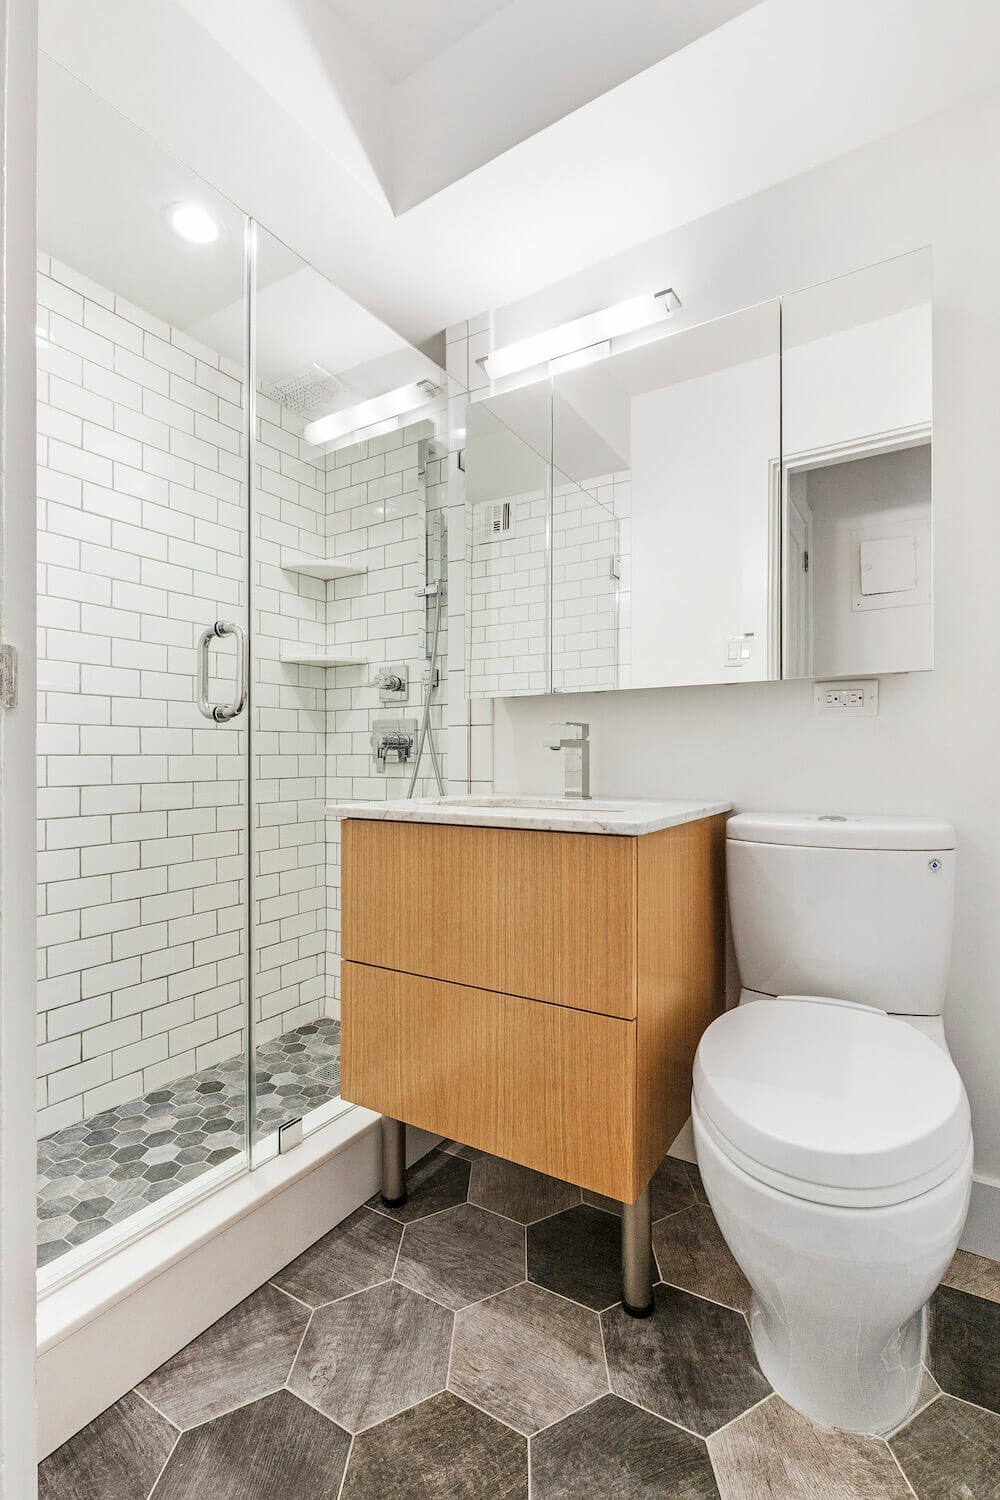 White bathroom with white subway tiles and contrasting gray grouting with slate colored hex tiles in shower and bathroom after renovation